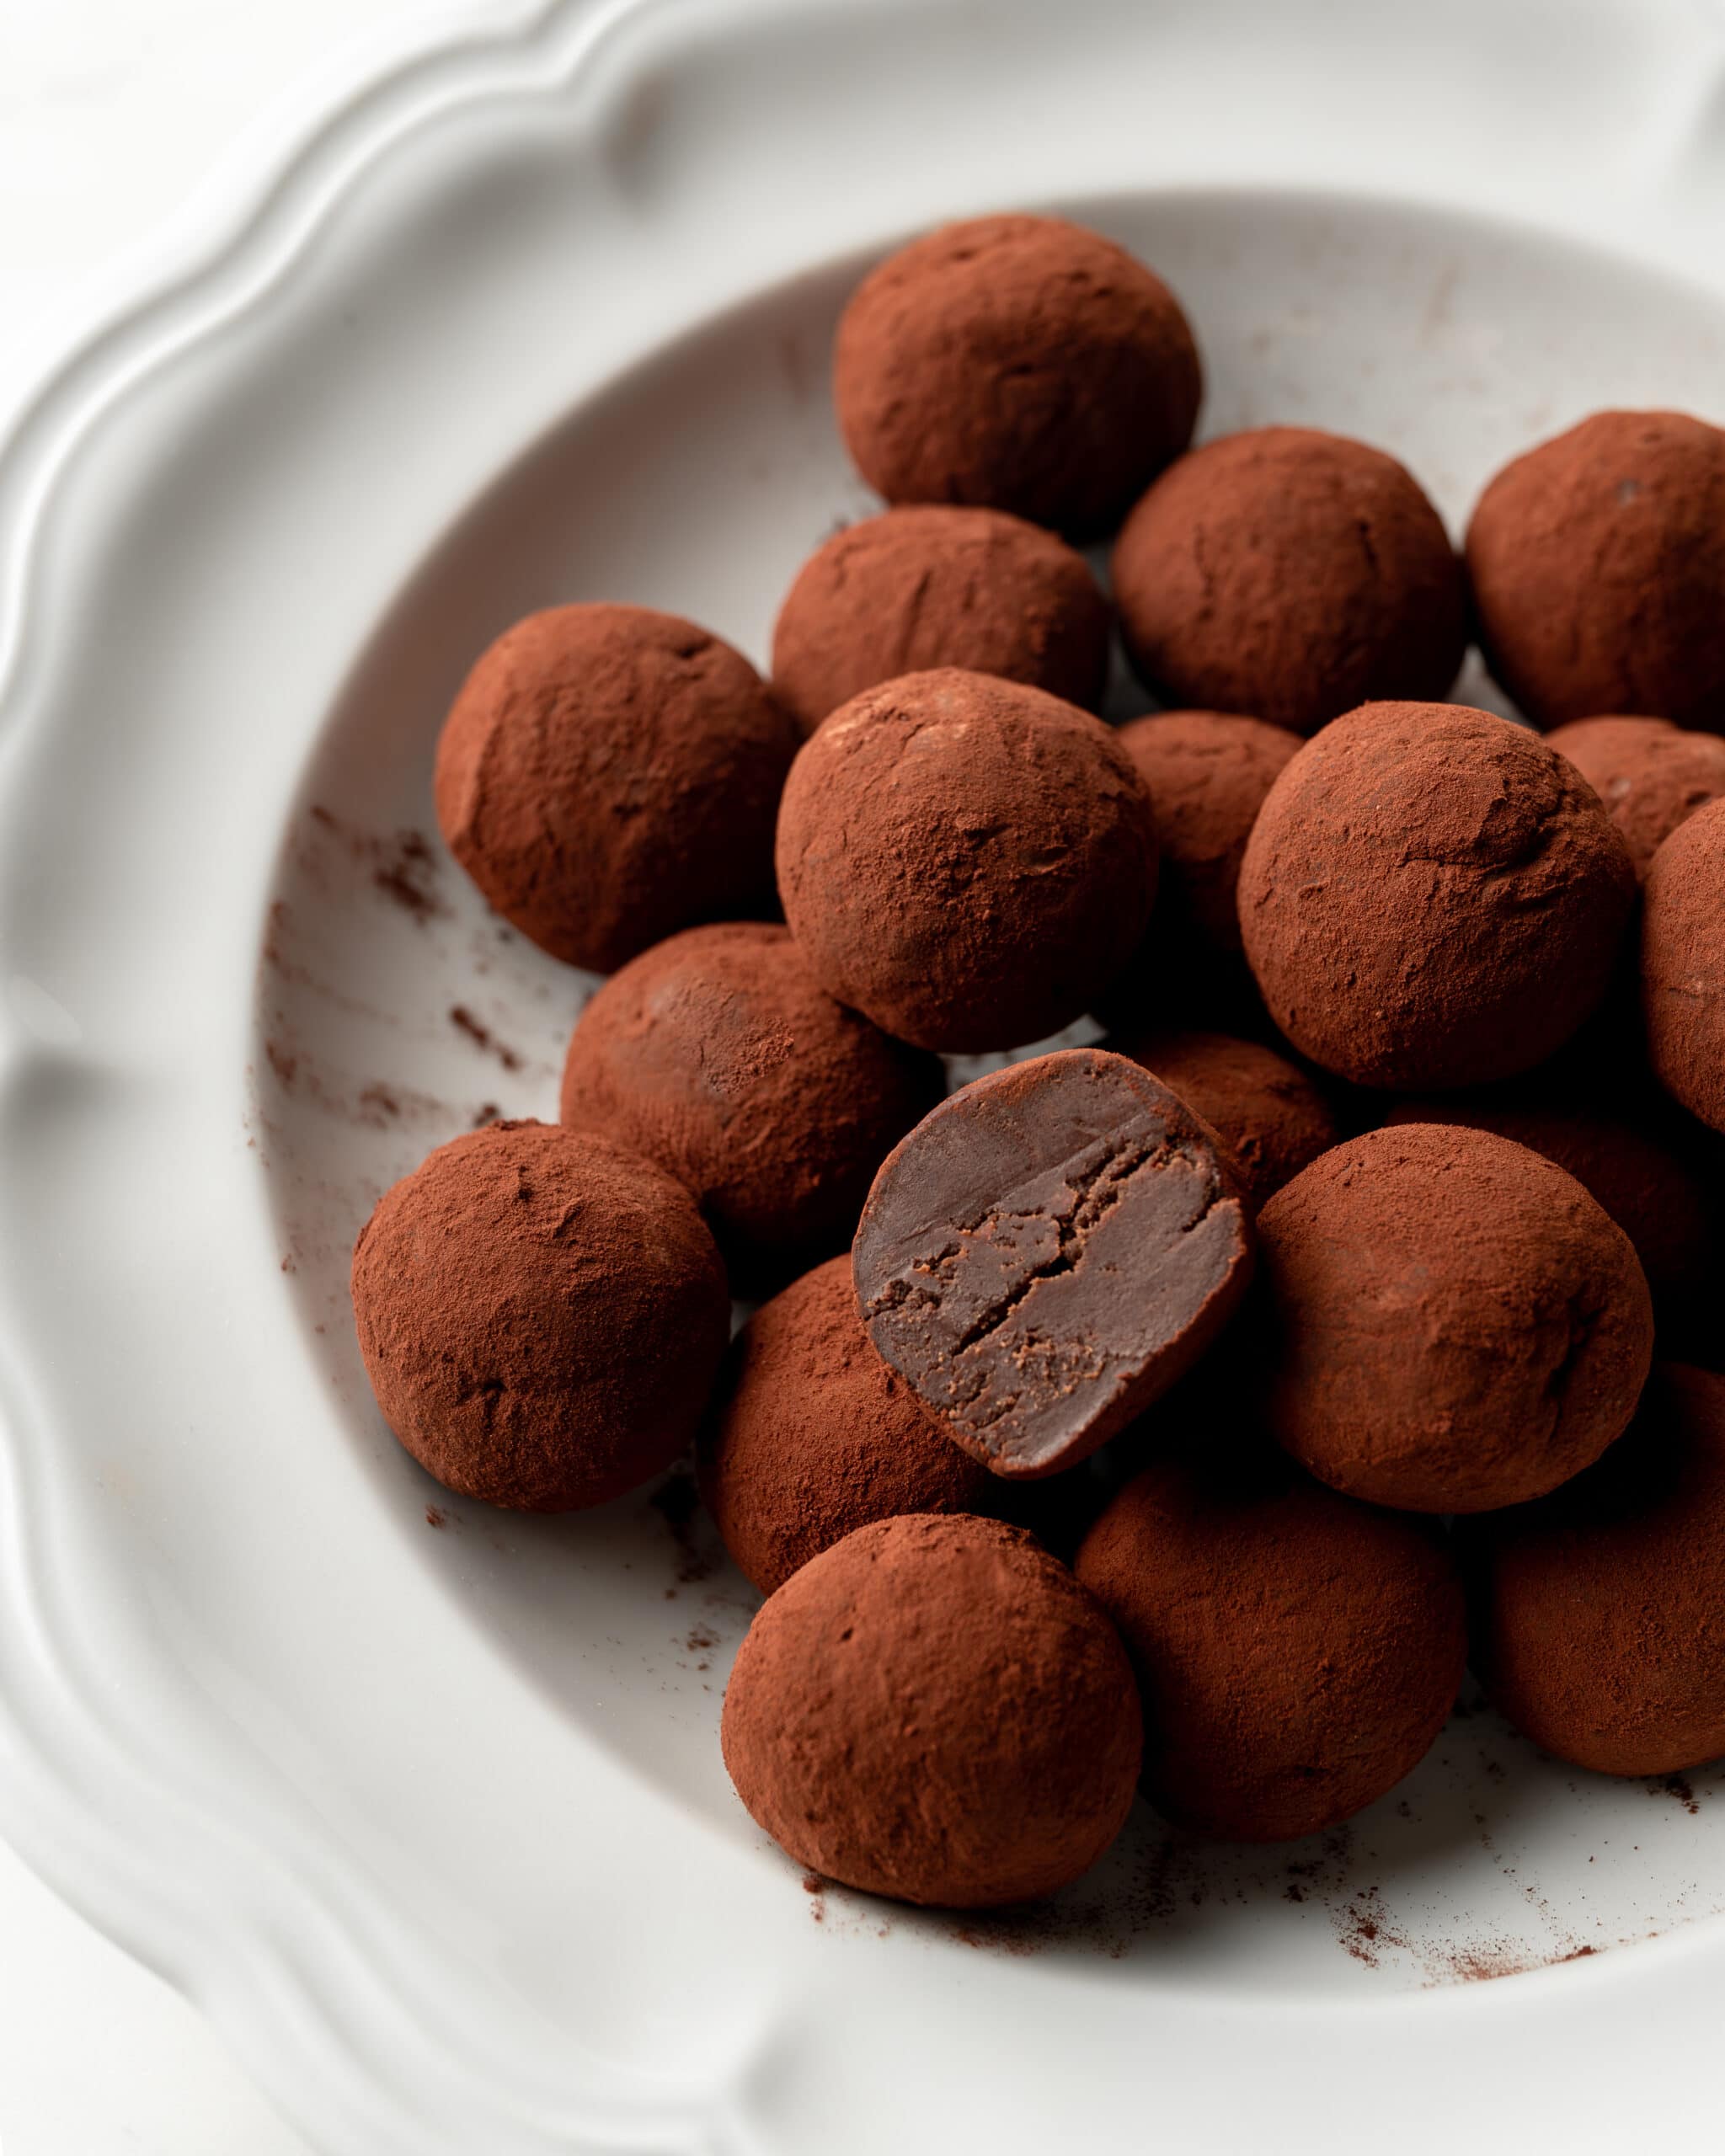 French truffles coated in cocoa powder with one truffle cut in half exposing the inside. 